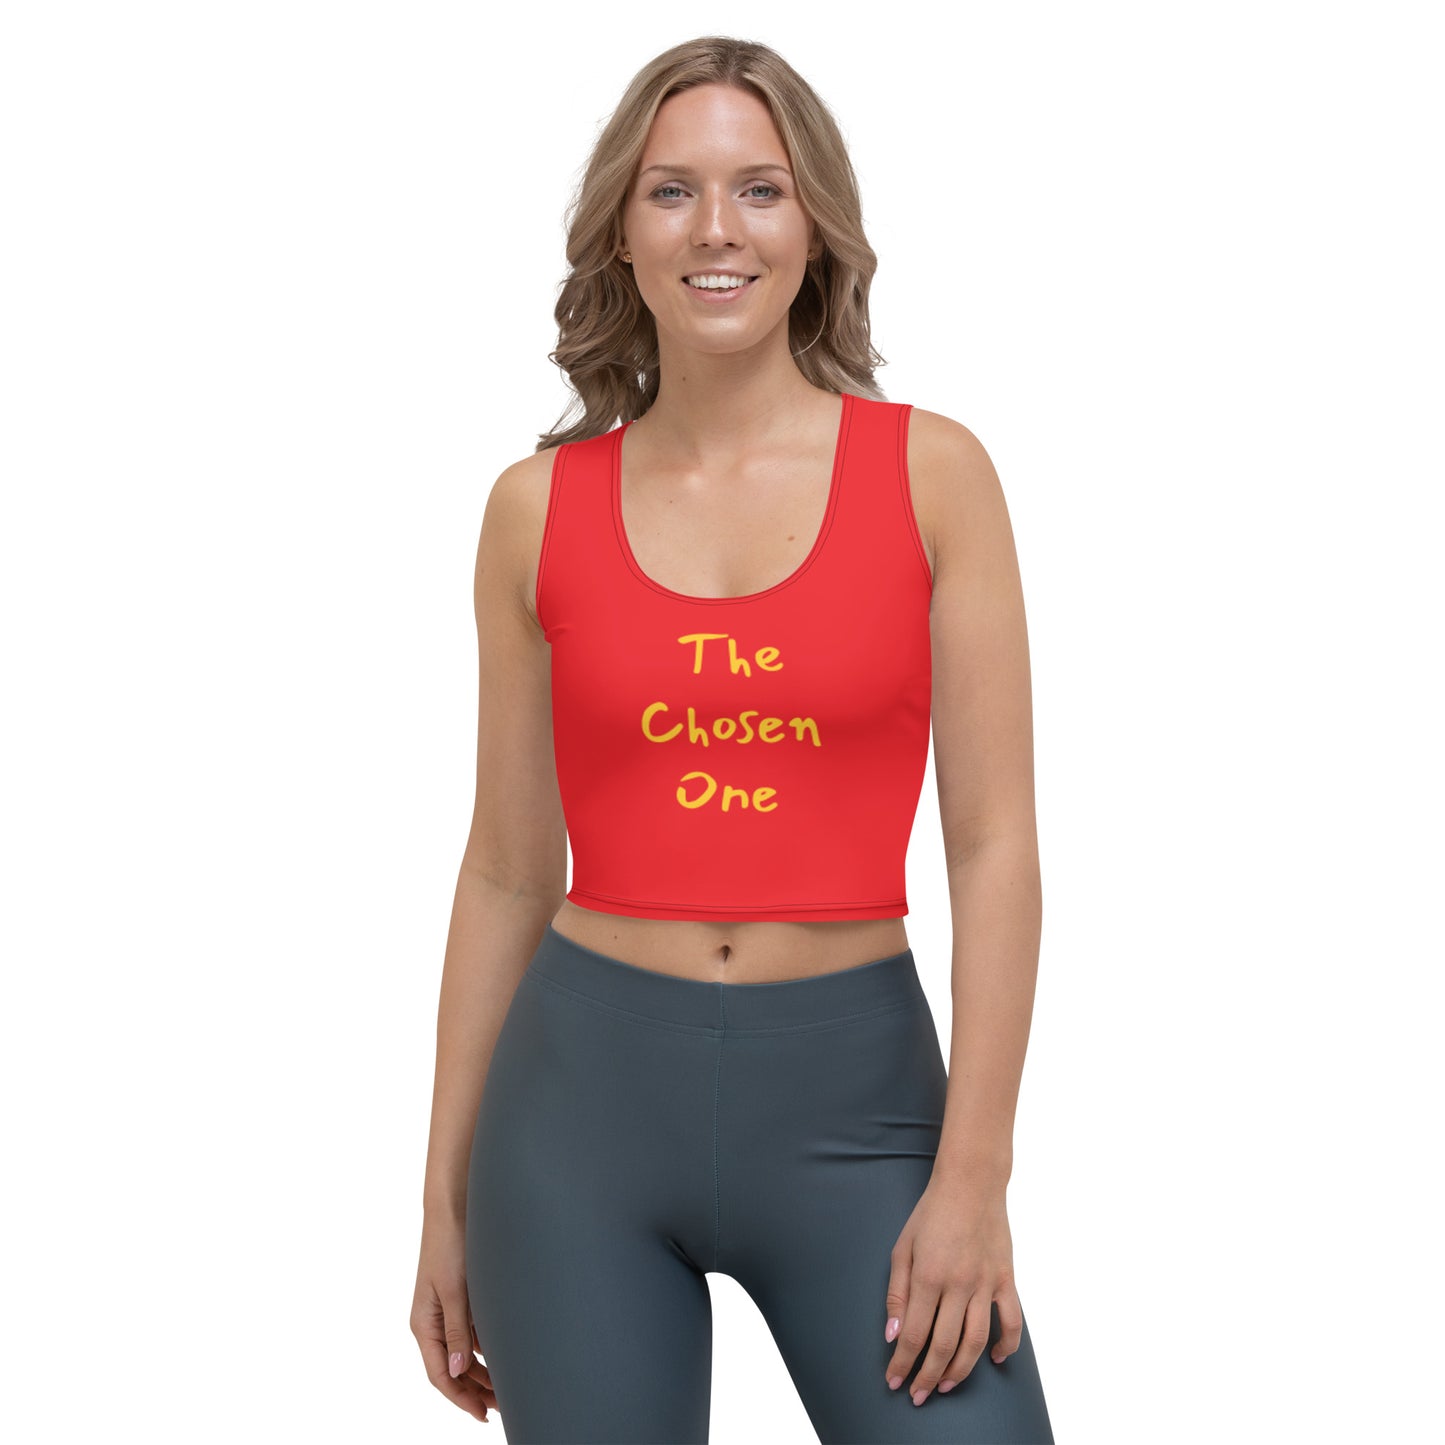 Red Crop Top - The Chosen One